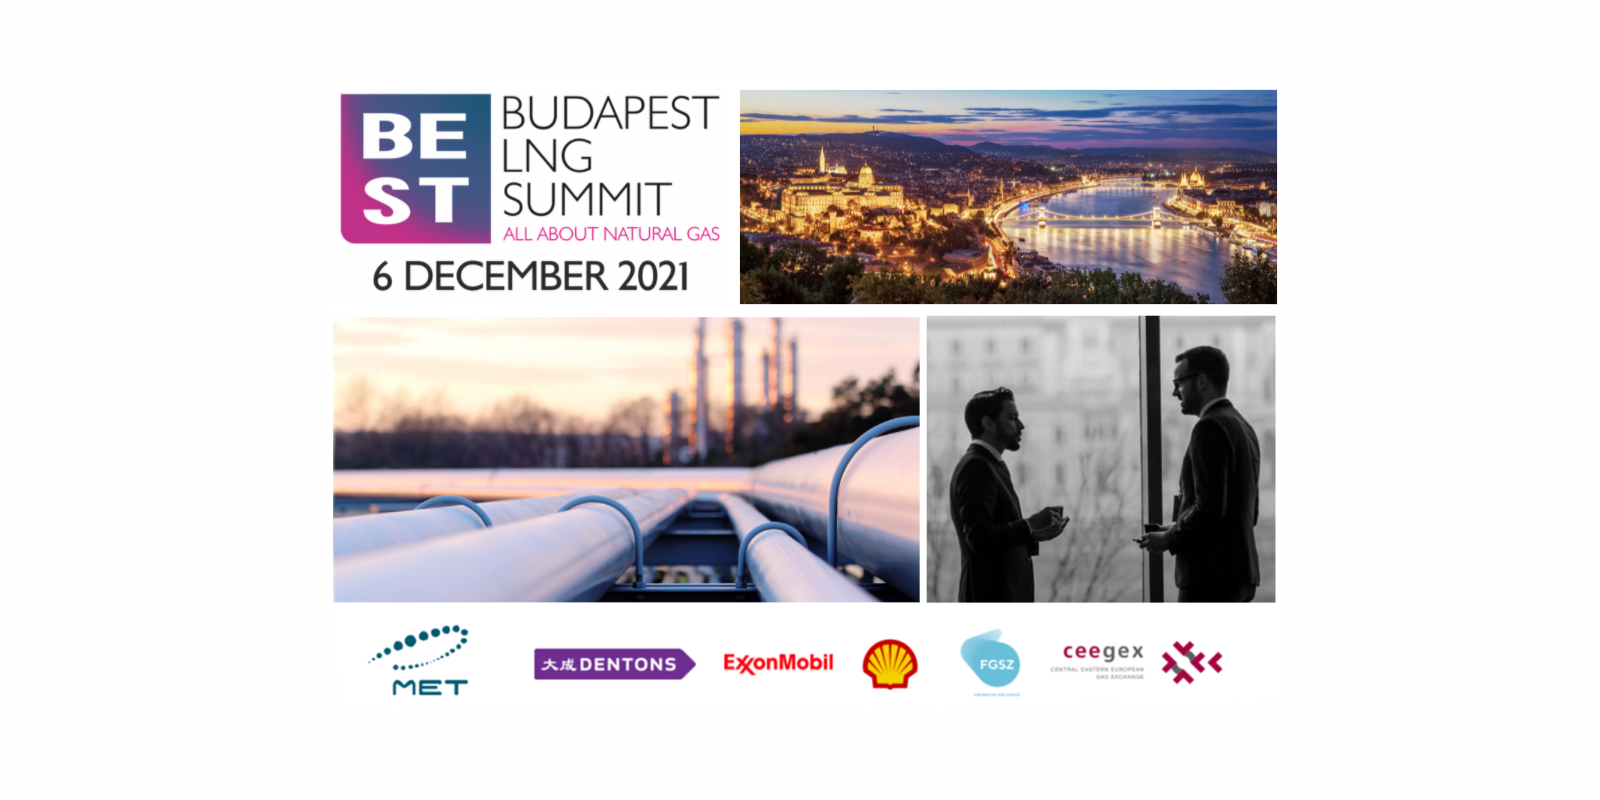 Energy leaders to discuss future of gas at 3. Budapest LNG S...